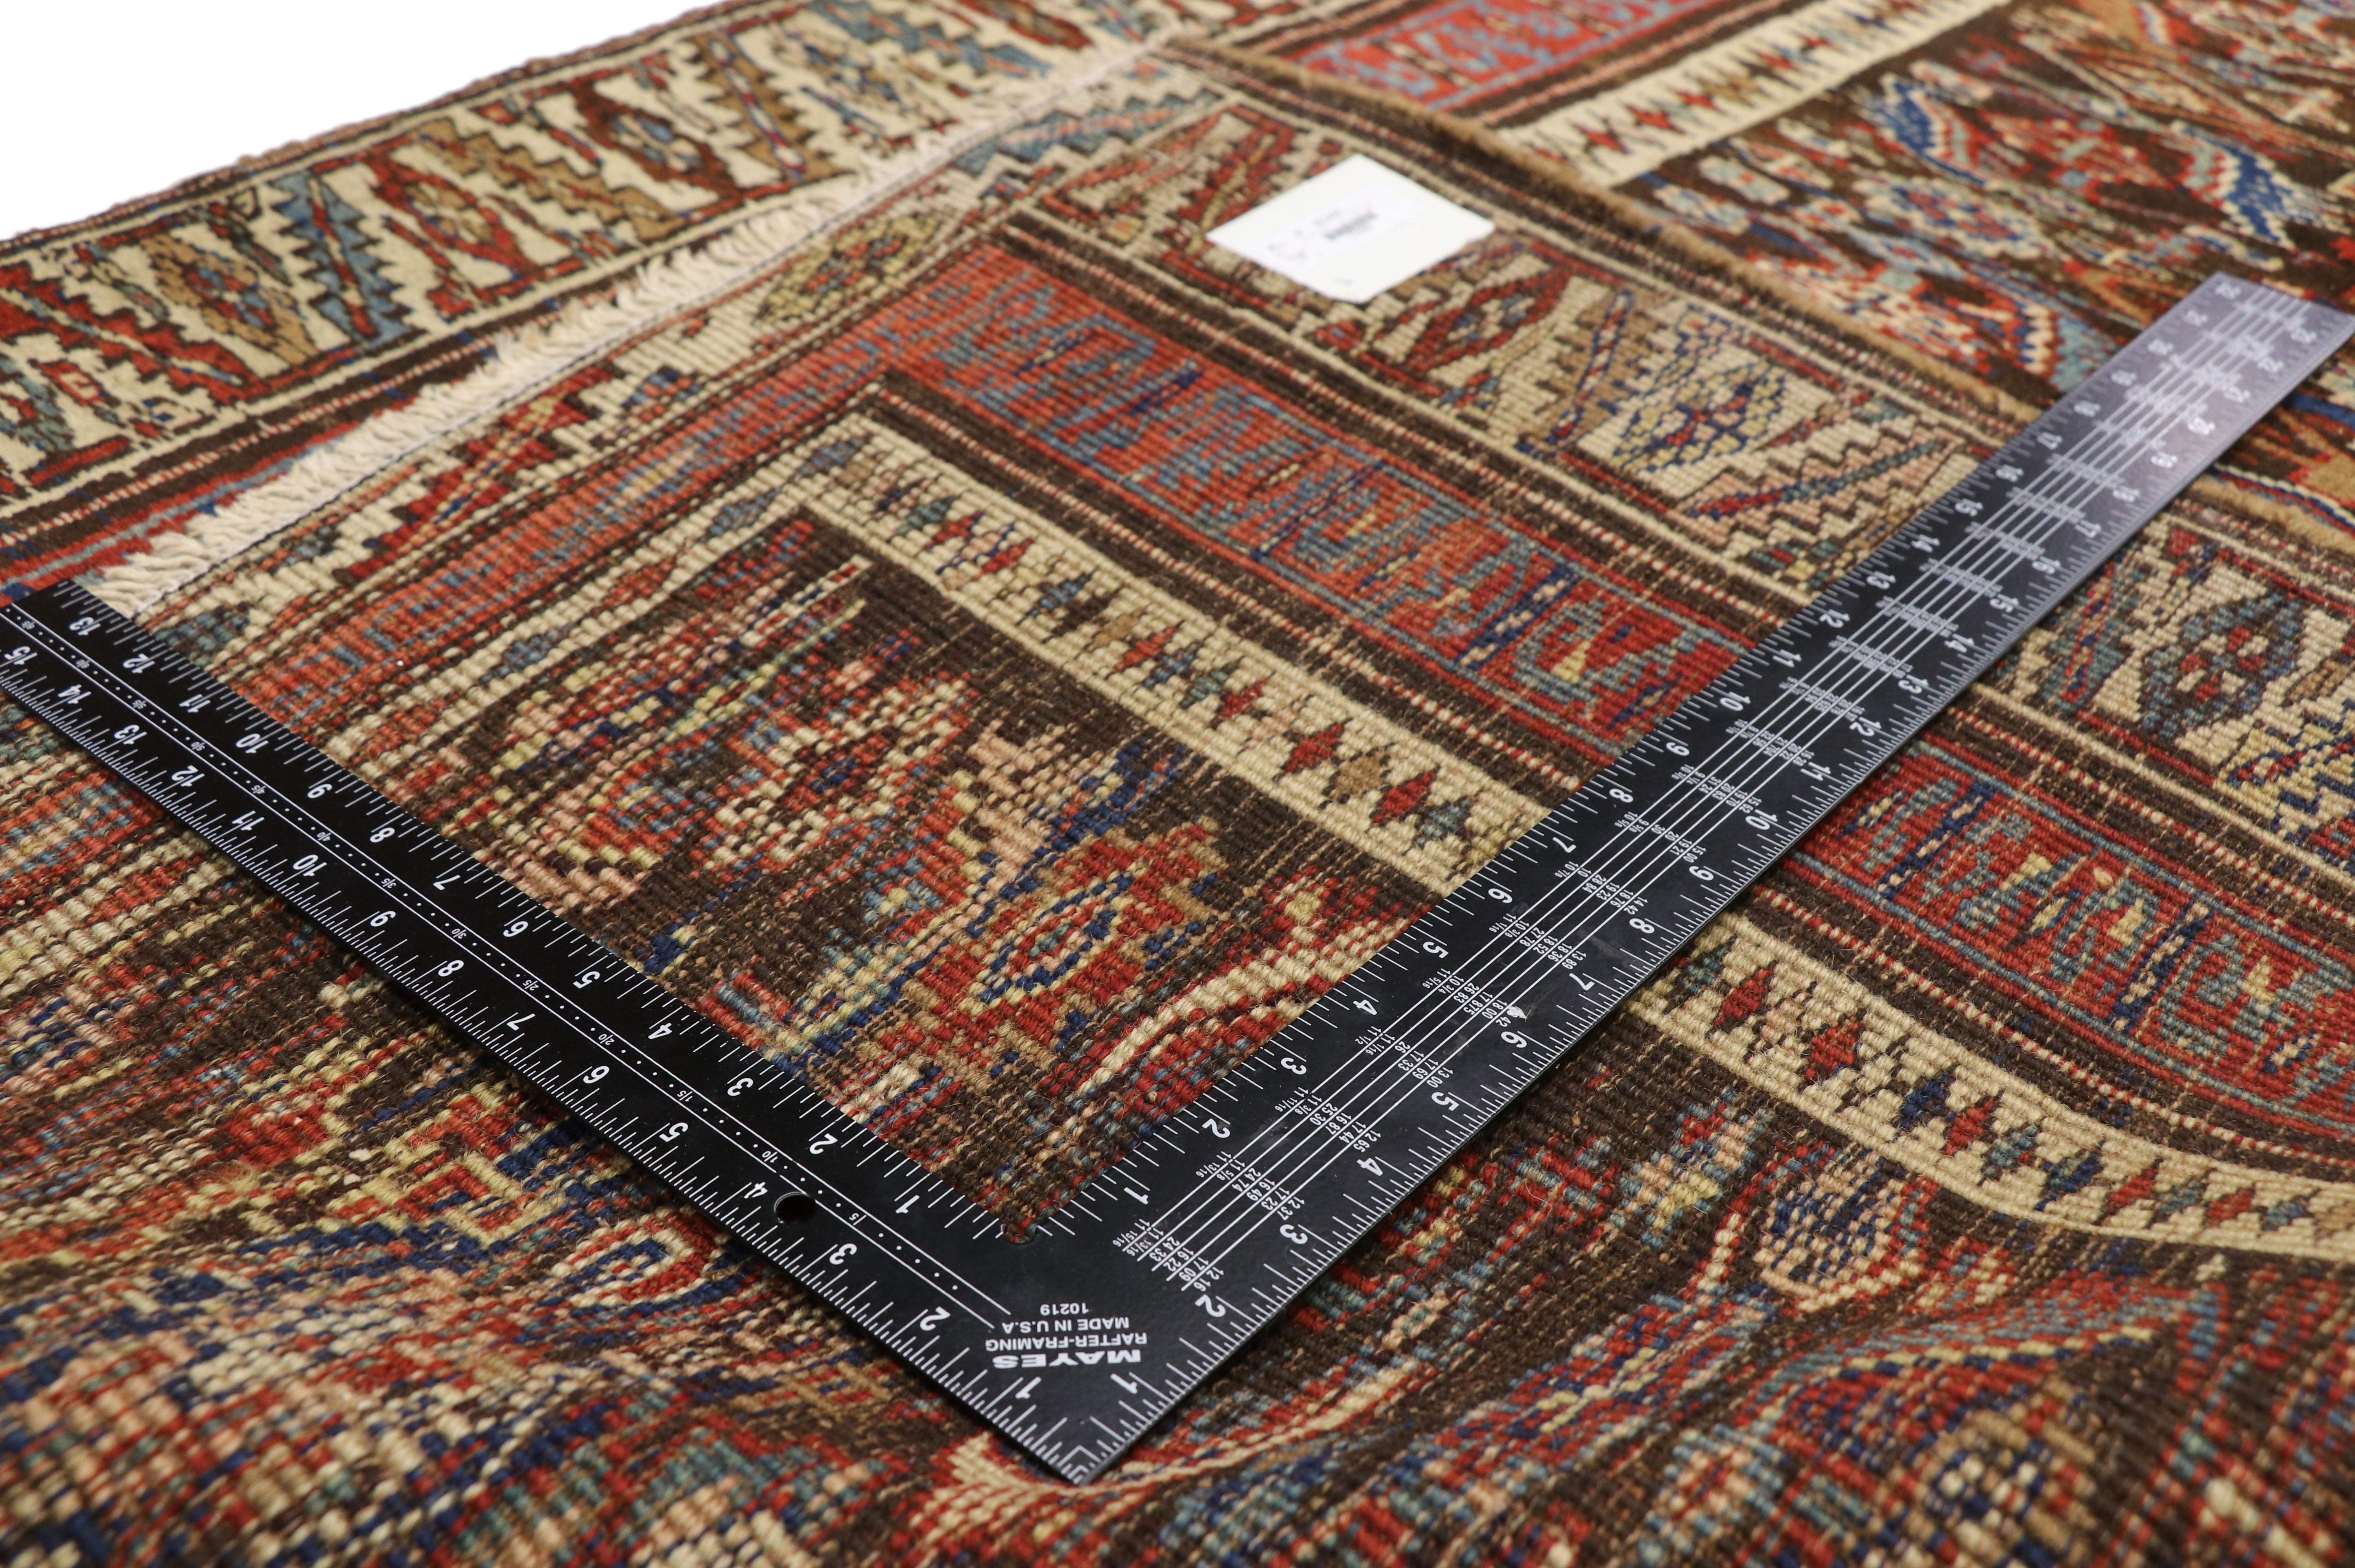 72392 late 19th century antique Persian Bijar runner, Tribal style Hallway runner. This late 19th century antique Persian Bijar runner features an all-over Herati pattern spread across an abrashed field. The classic Herati pattern, also known as the